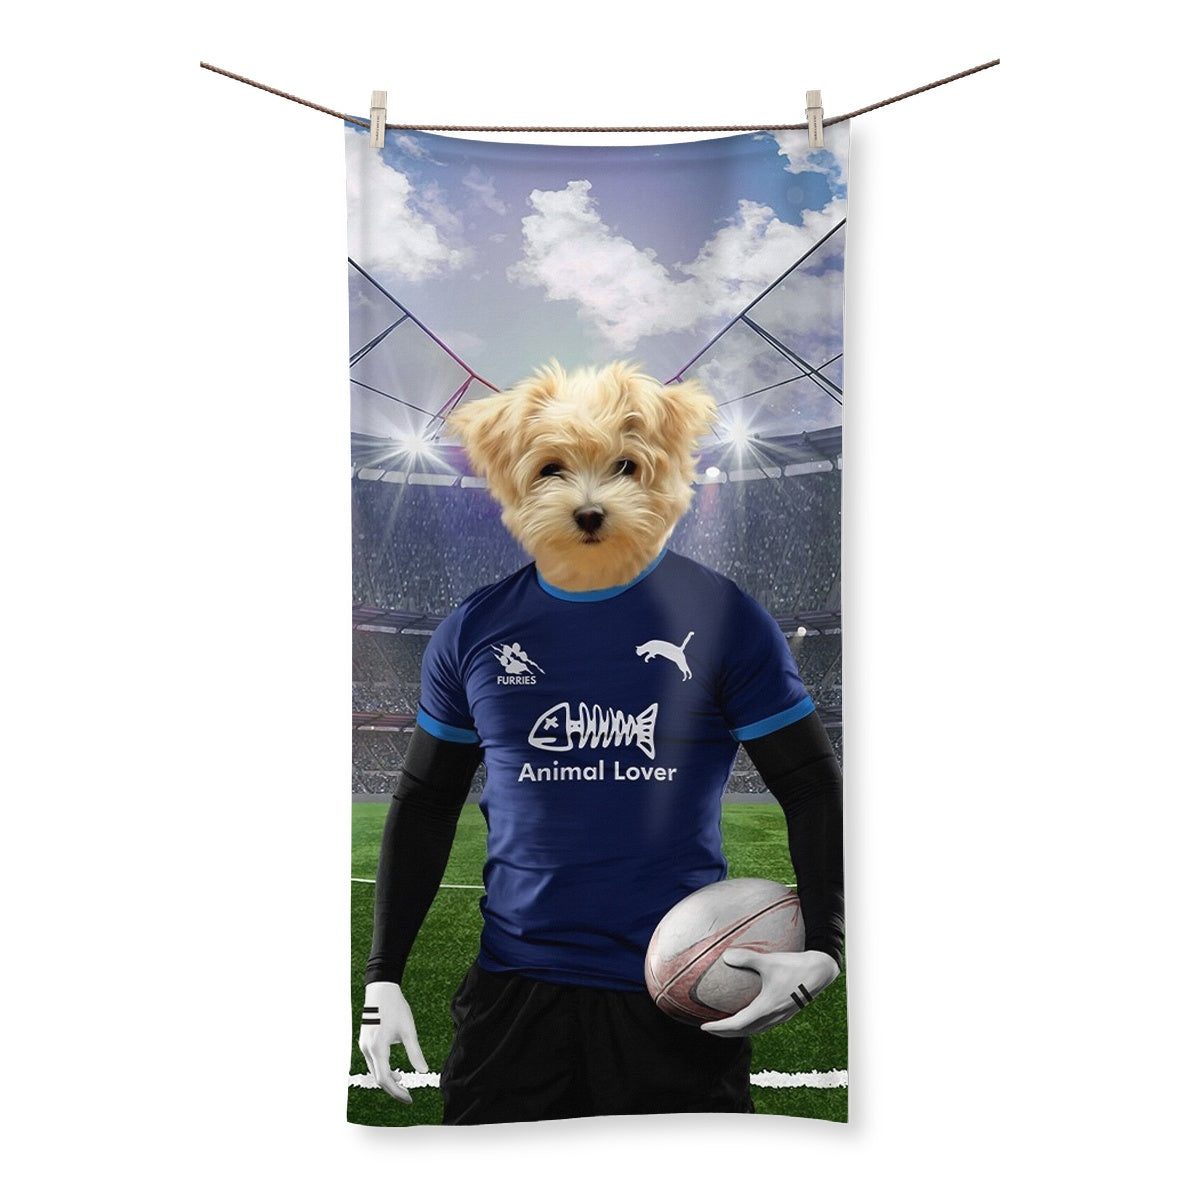 Scotland Rugby Team: Paw & Glory, paw and glory, pet throw blankets, personalized dog head blanket, dog printed blanket, pet blanket custom, pet photo on blanket, pet art dog head blanket, Pet Portrait blanket